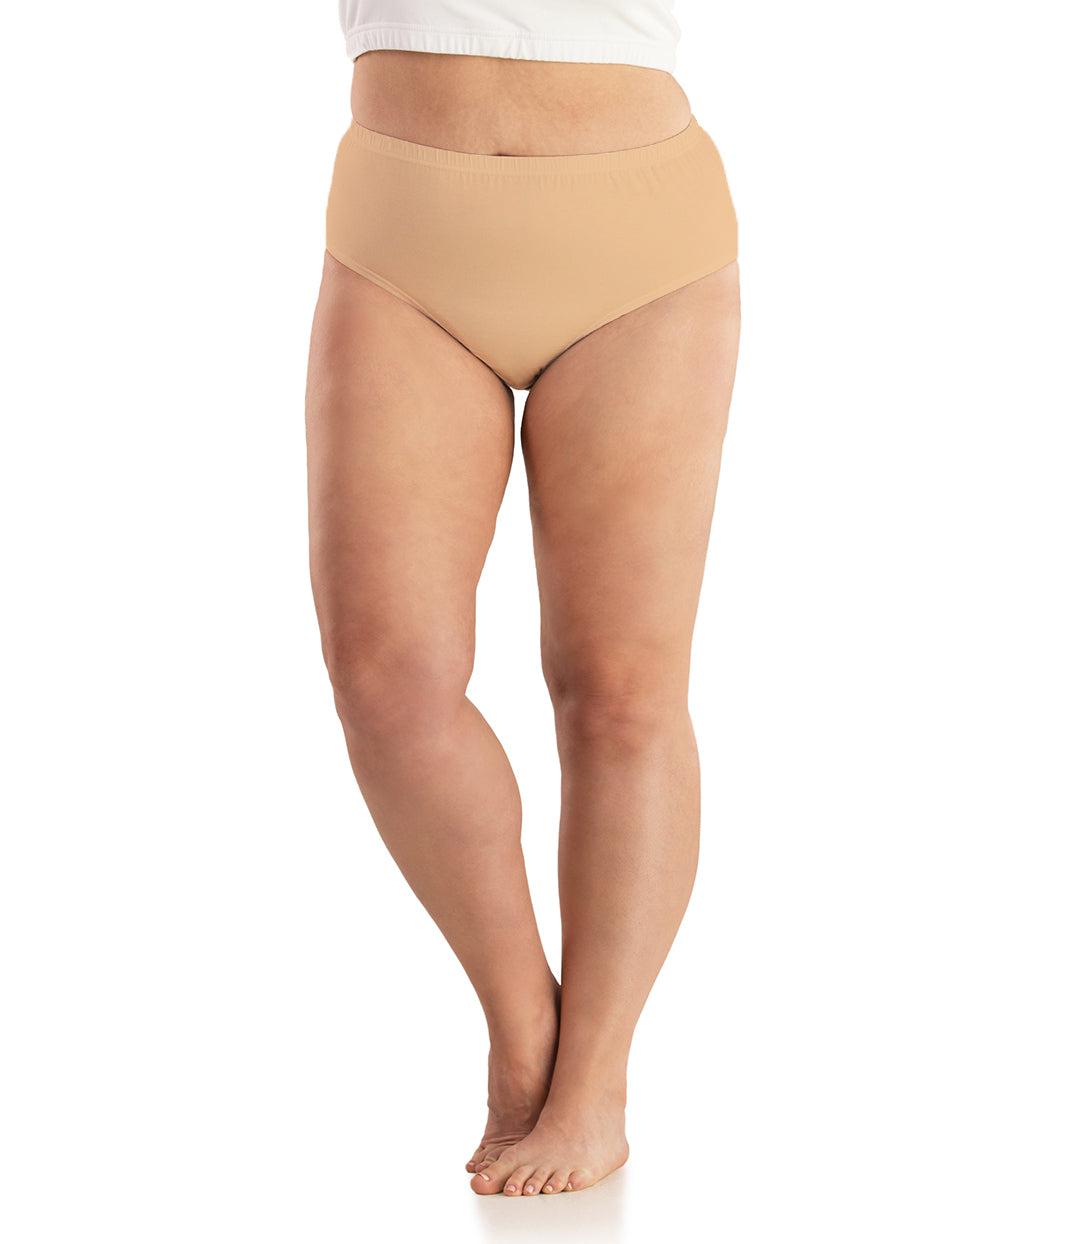 Bottom half of plus sized woman, facing front, wearing JunoActive Junowear Cotton Stretch Classic Brief in Taupe. This brief fits to the waistline with conservative leg opening.